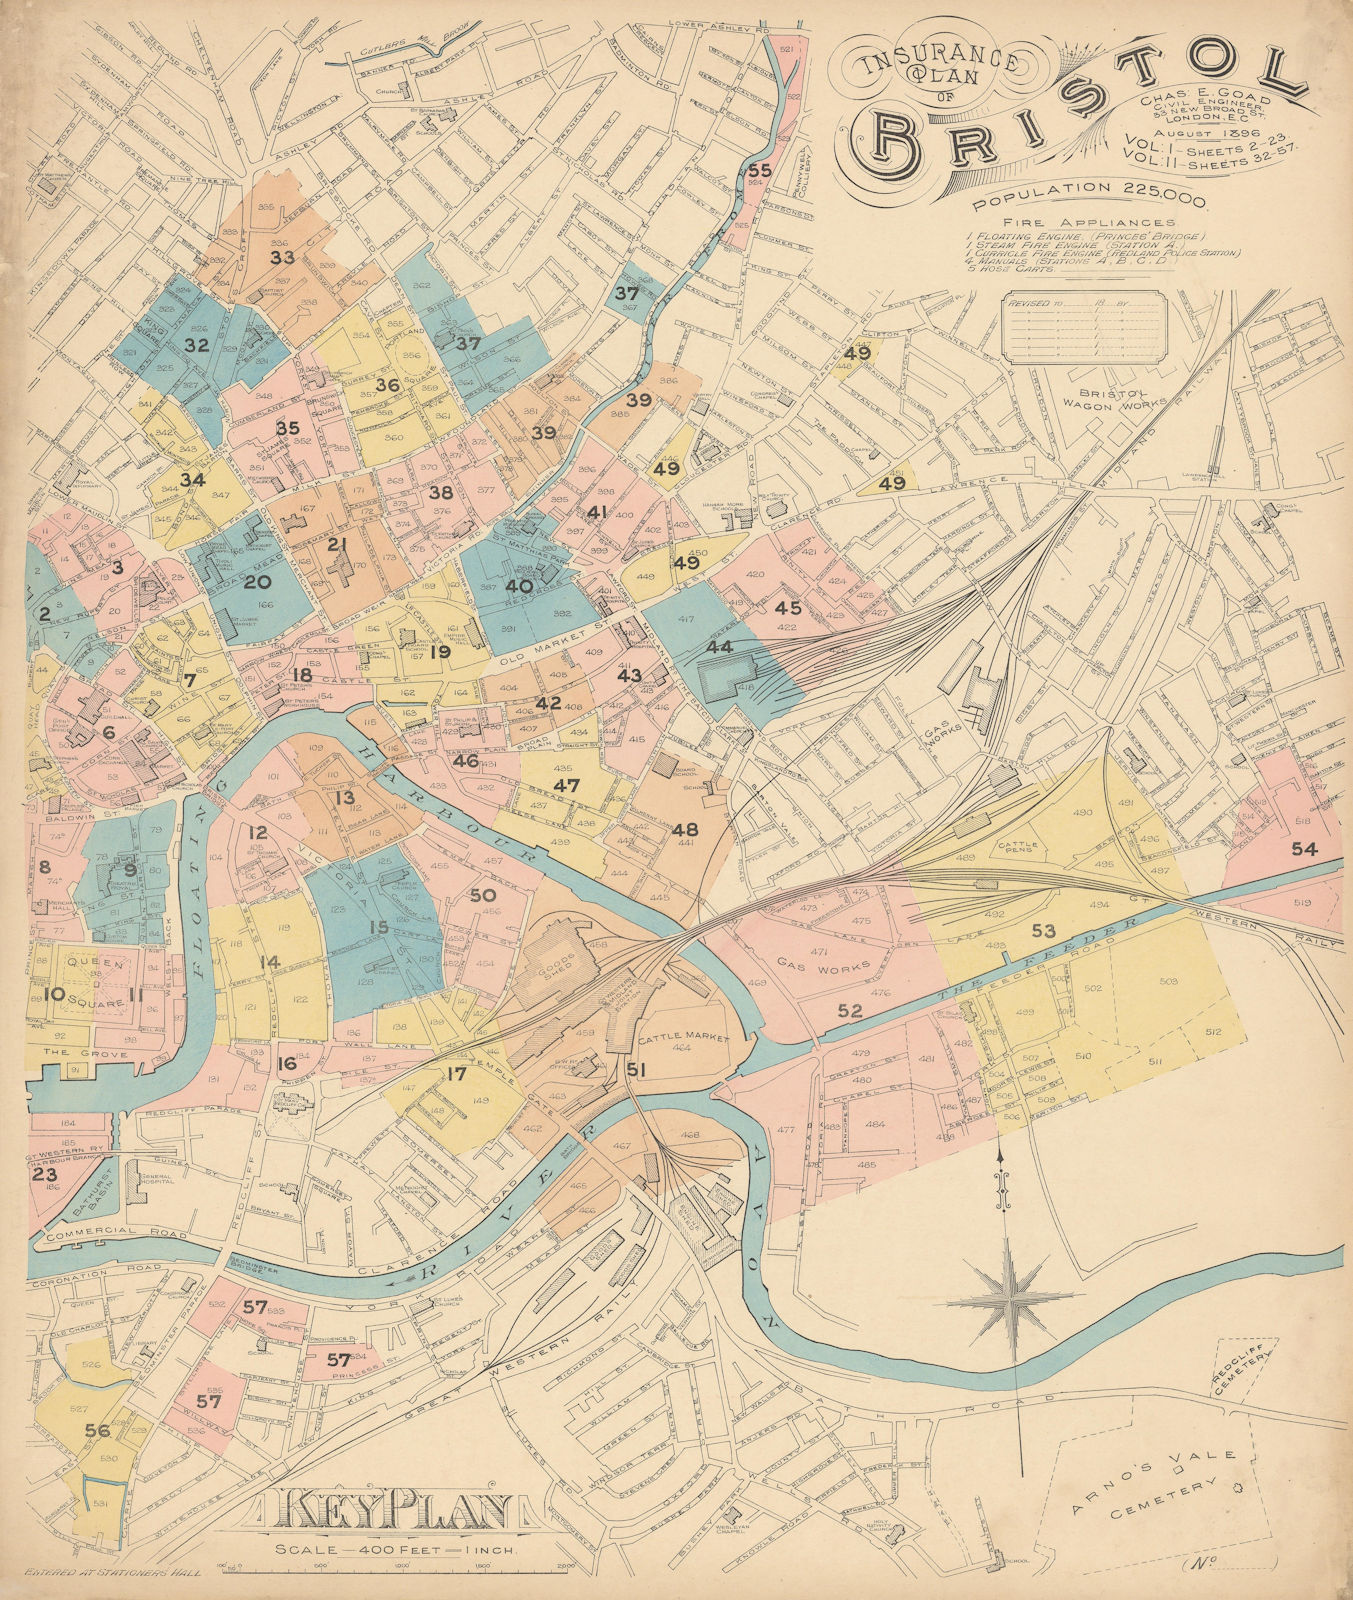 Associate Product Charles Goad Insurance Key Plan of Bristol. City Centre 1896 old antique map